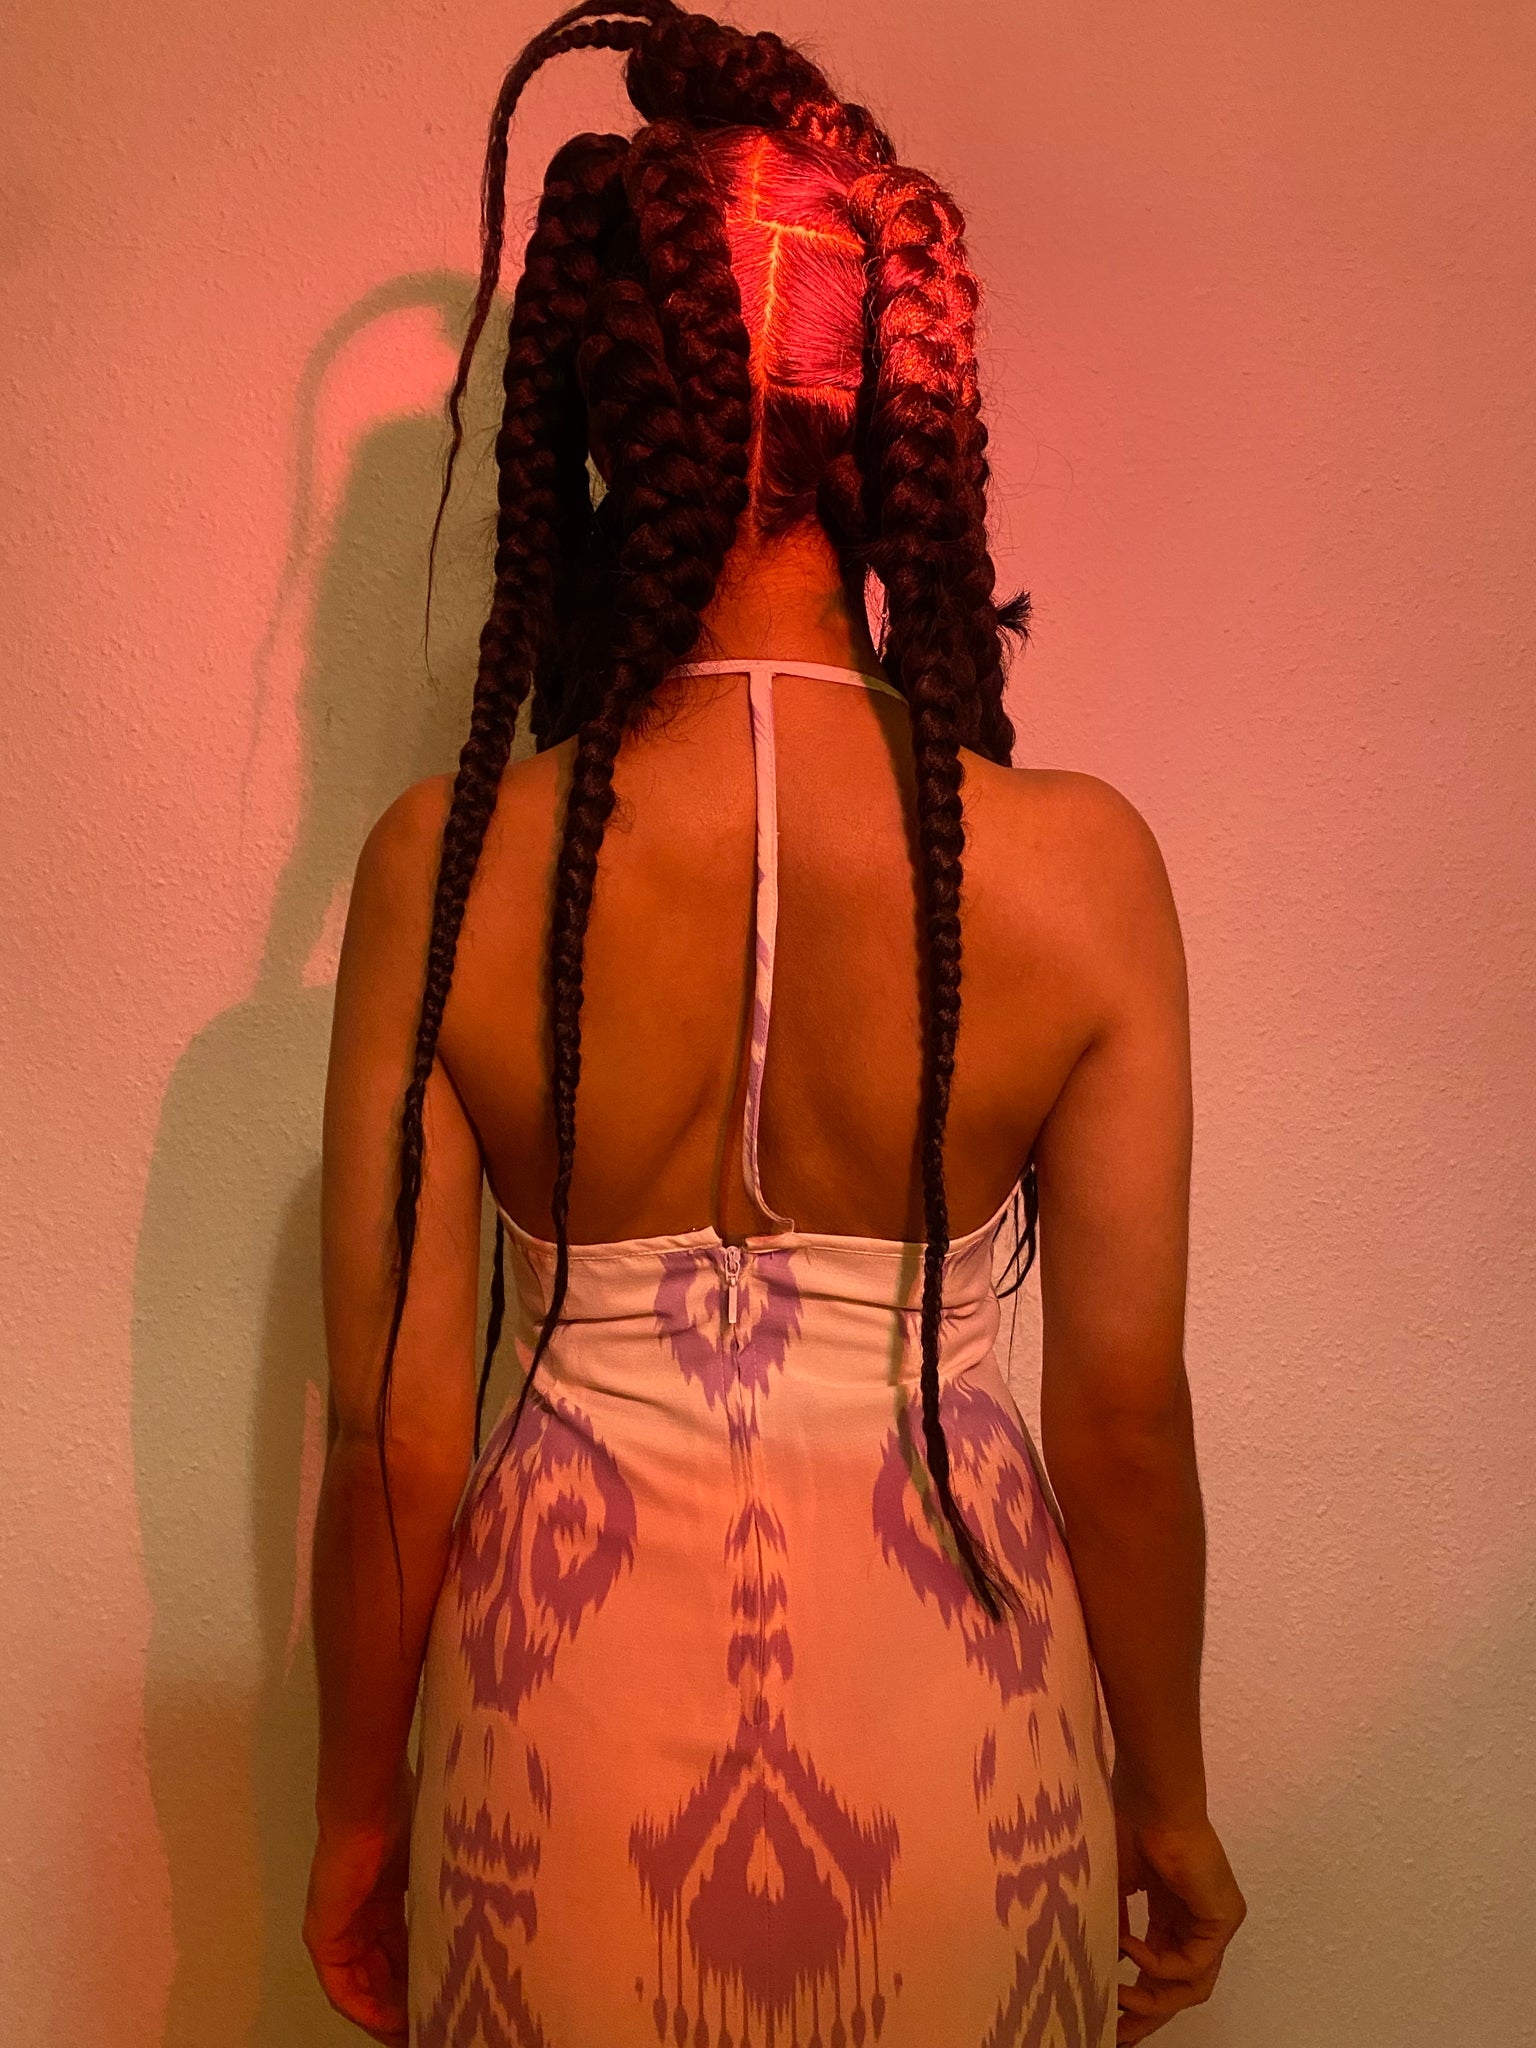 A woman with braids back wearing a white and lavender adras dress.